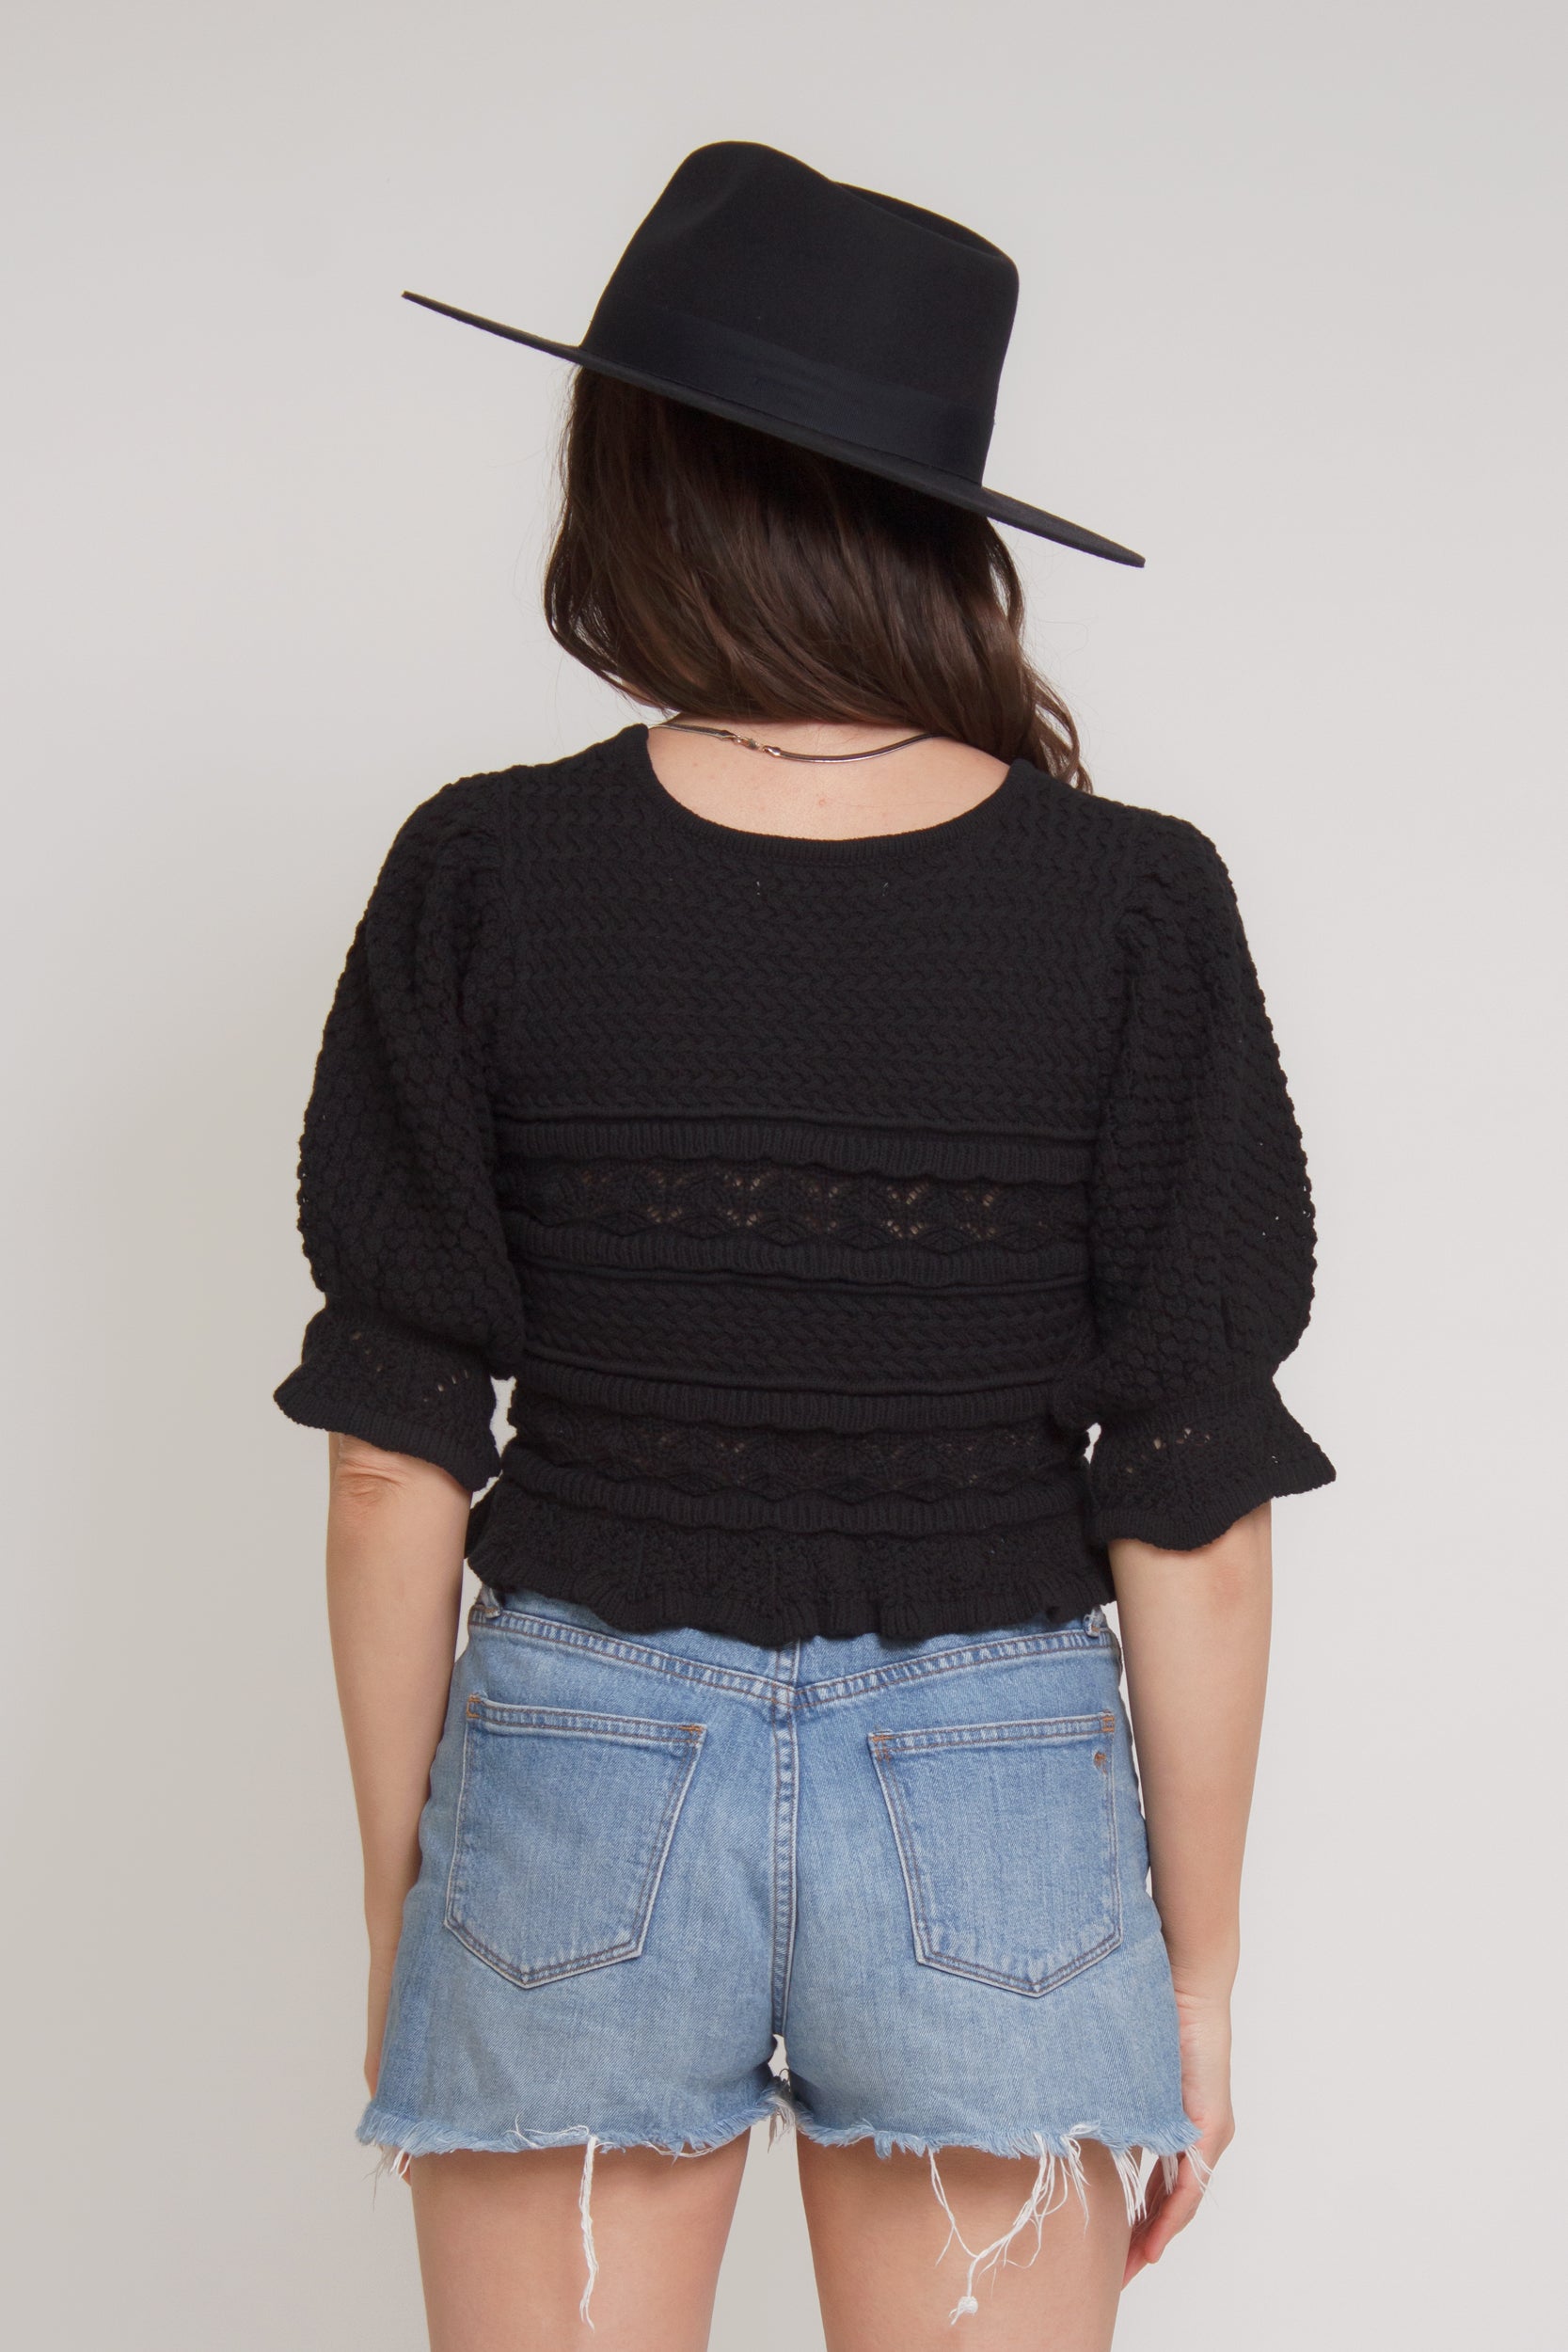 Jacquard sweater top with puff sleeves, in black. Image 10